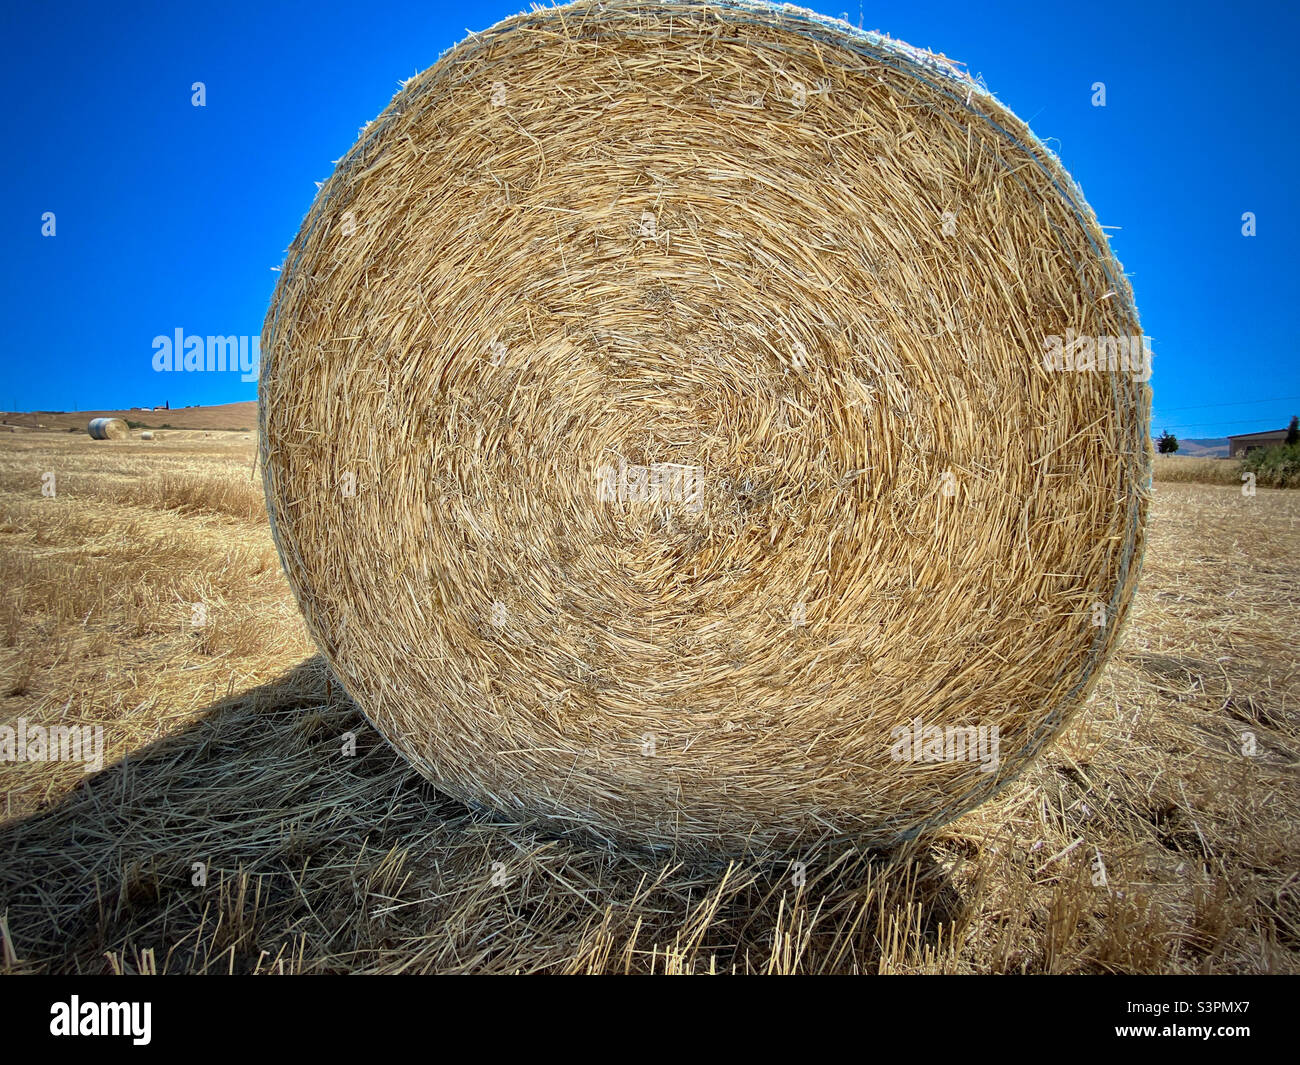 Large bale/roll of hay in the Tuscan countryside. Tuscany, Italy Stock Photo